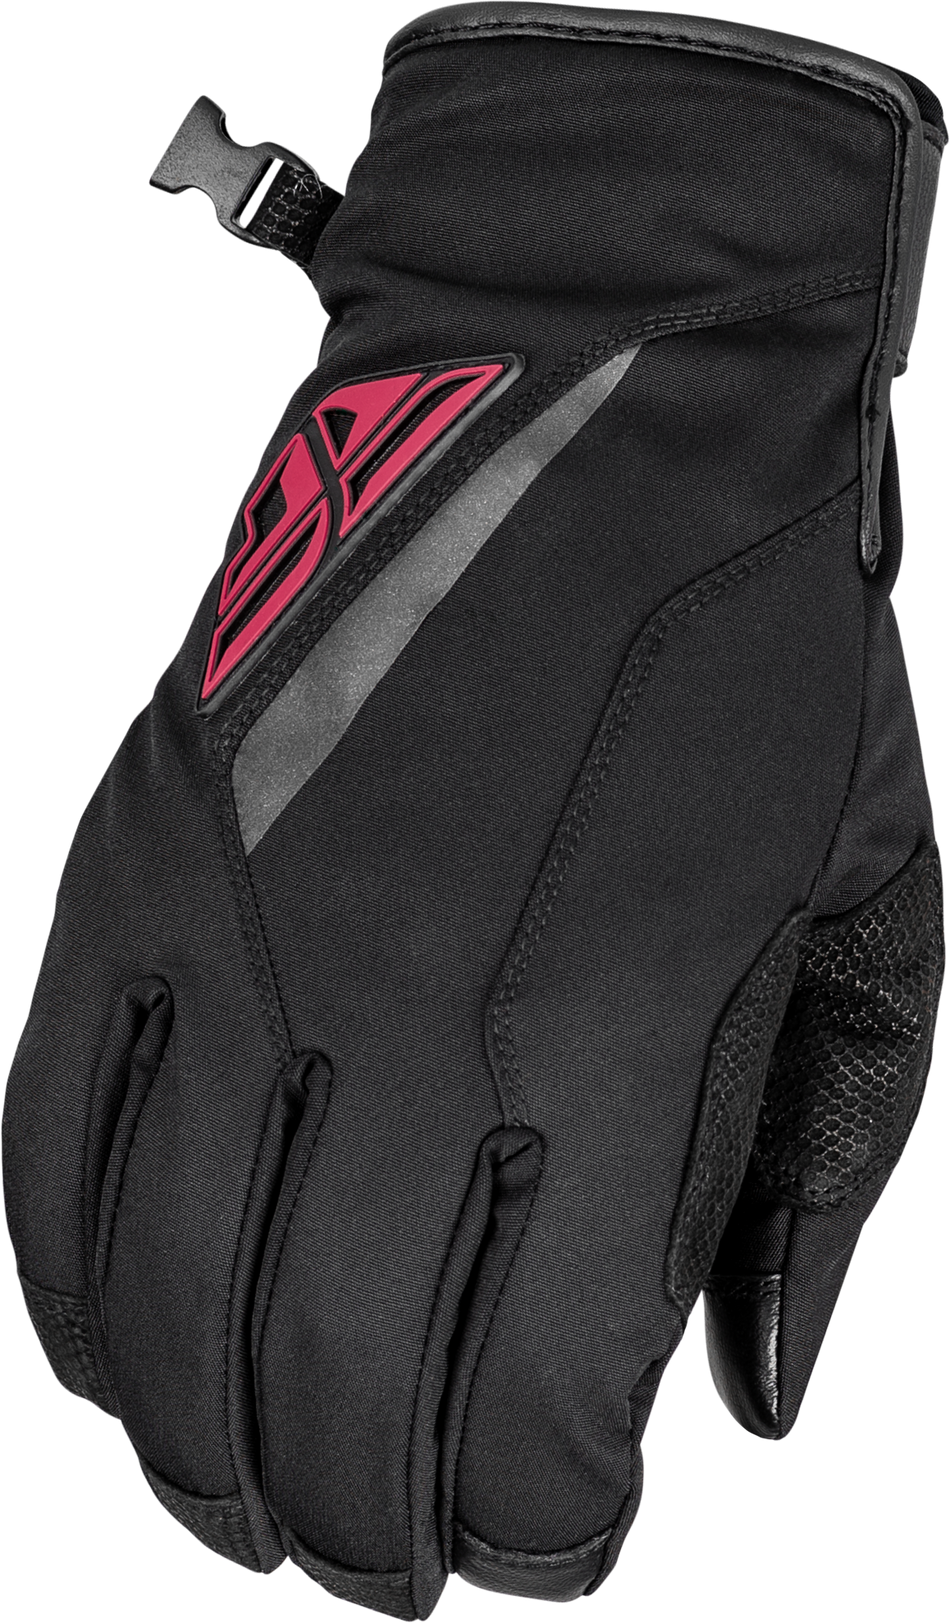 FLY RACING Title Long Gloves Black/Pink Md 371-0614M